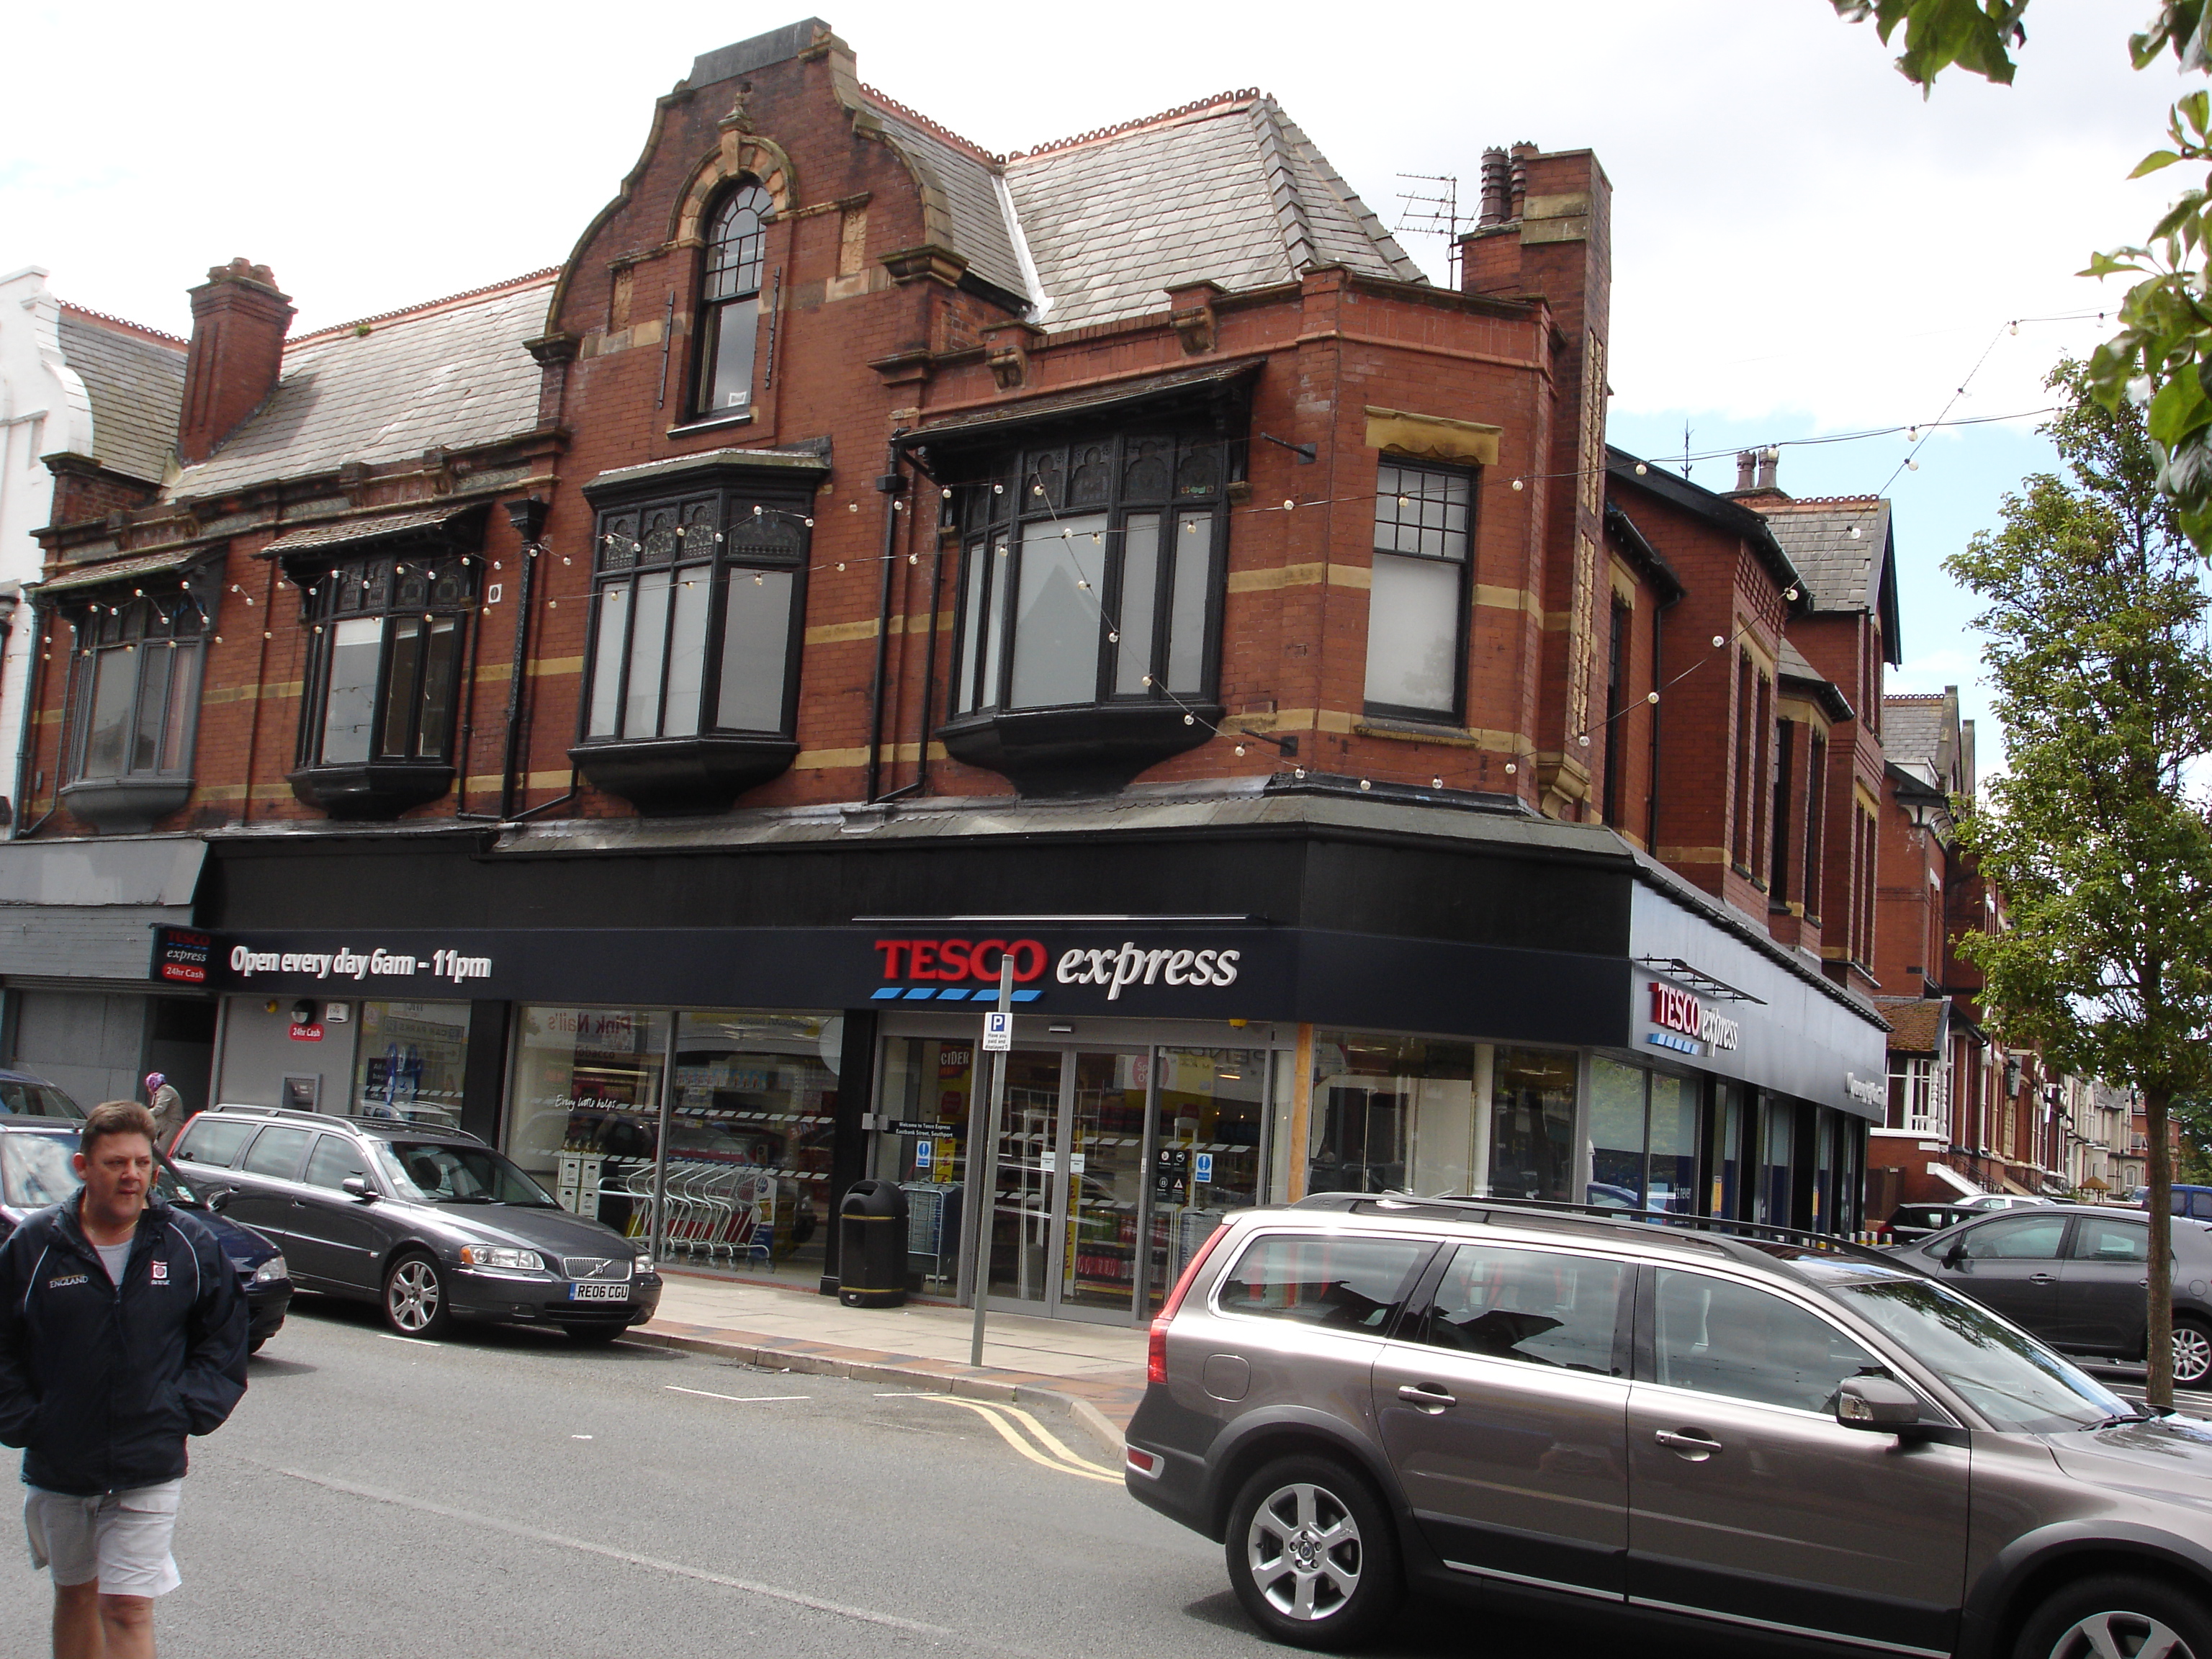 42-46 Eastbank Street, Southport (now let to Tesco)